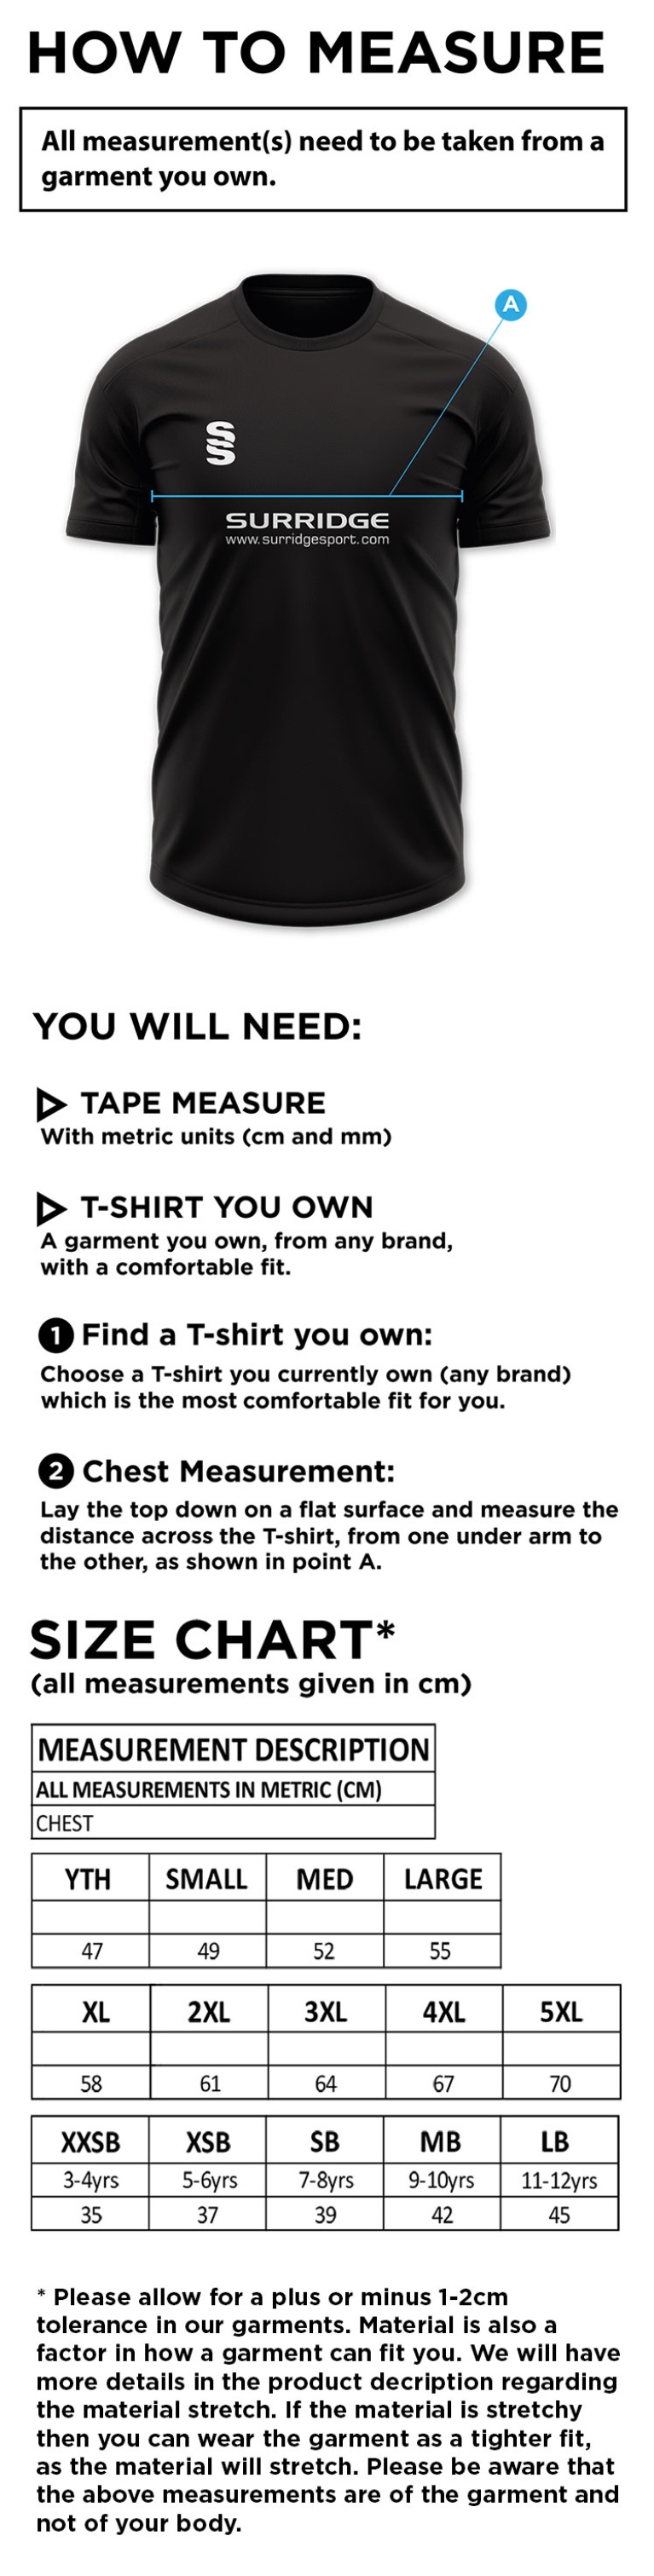 Youth's Dual Games Shirt : Amber - Size Guide